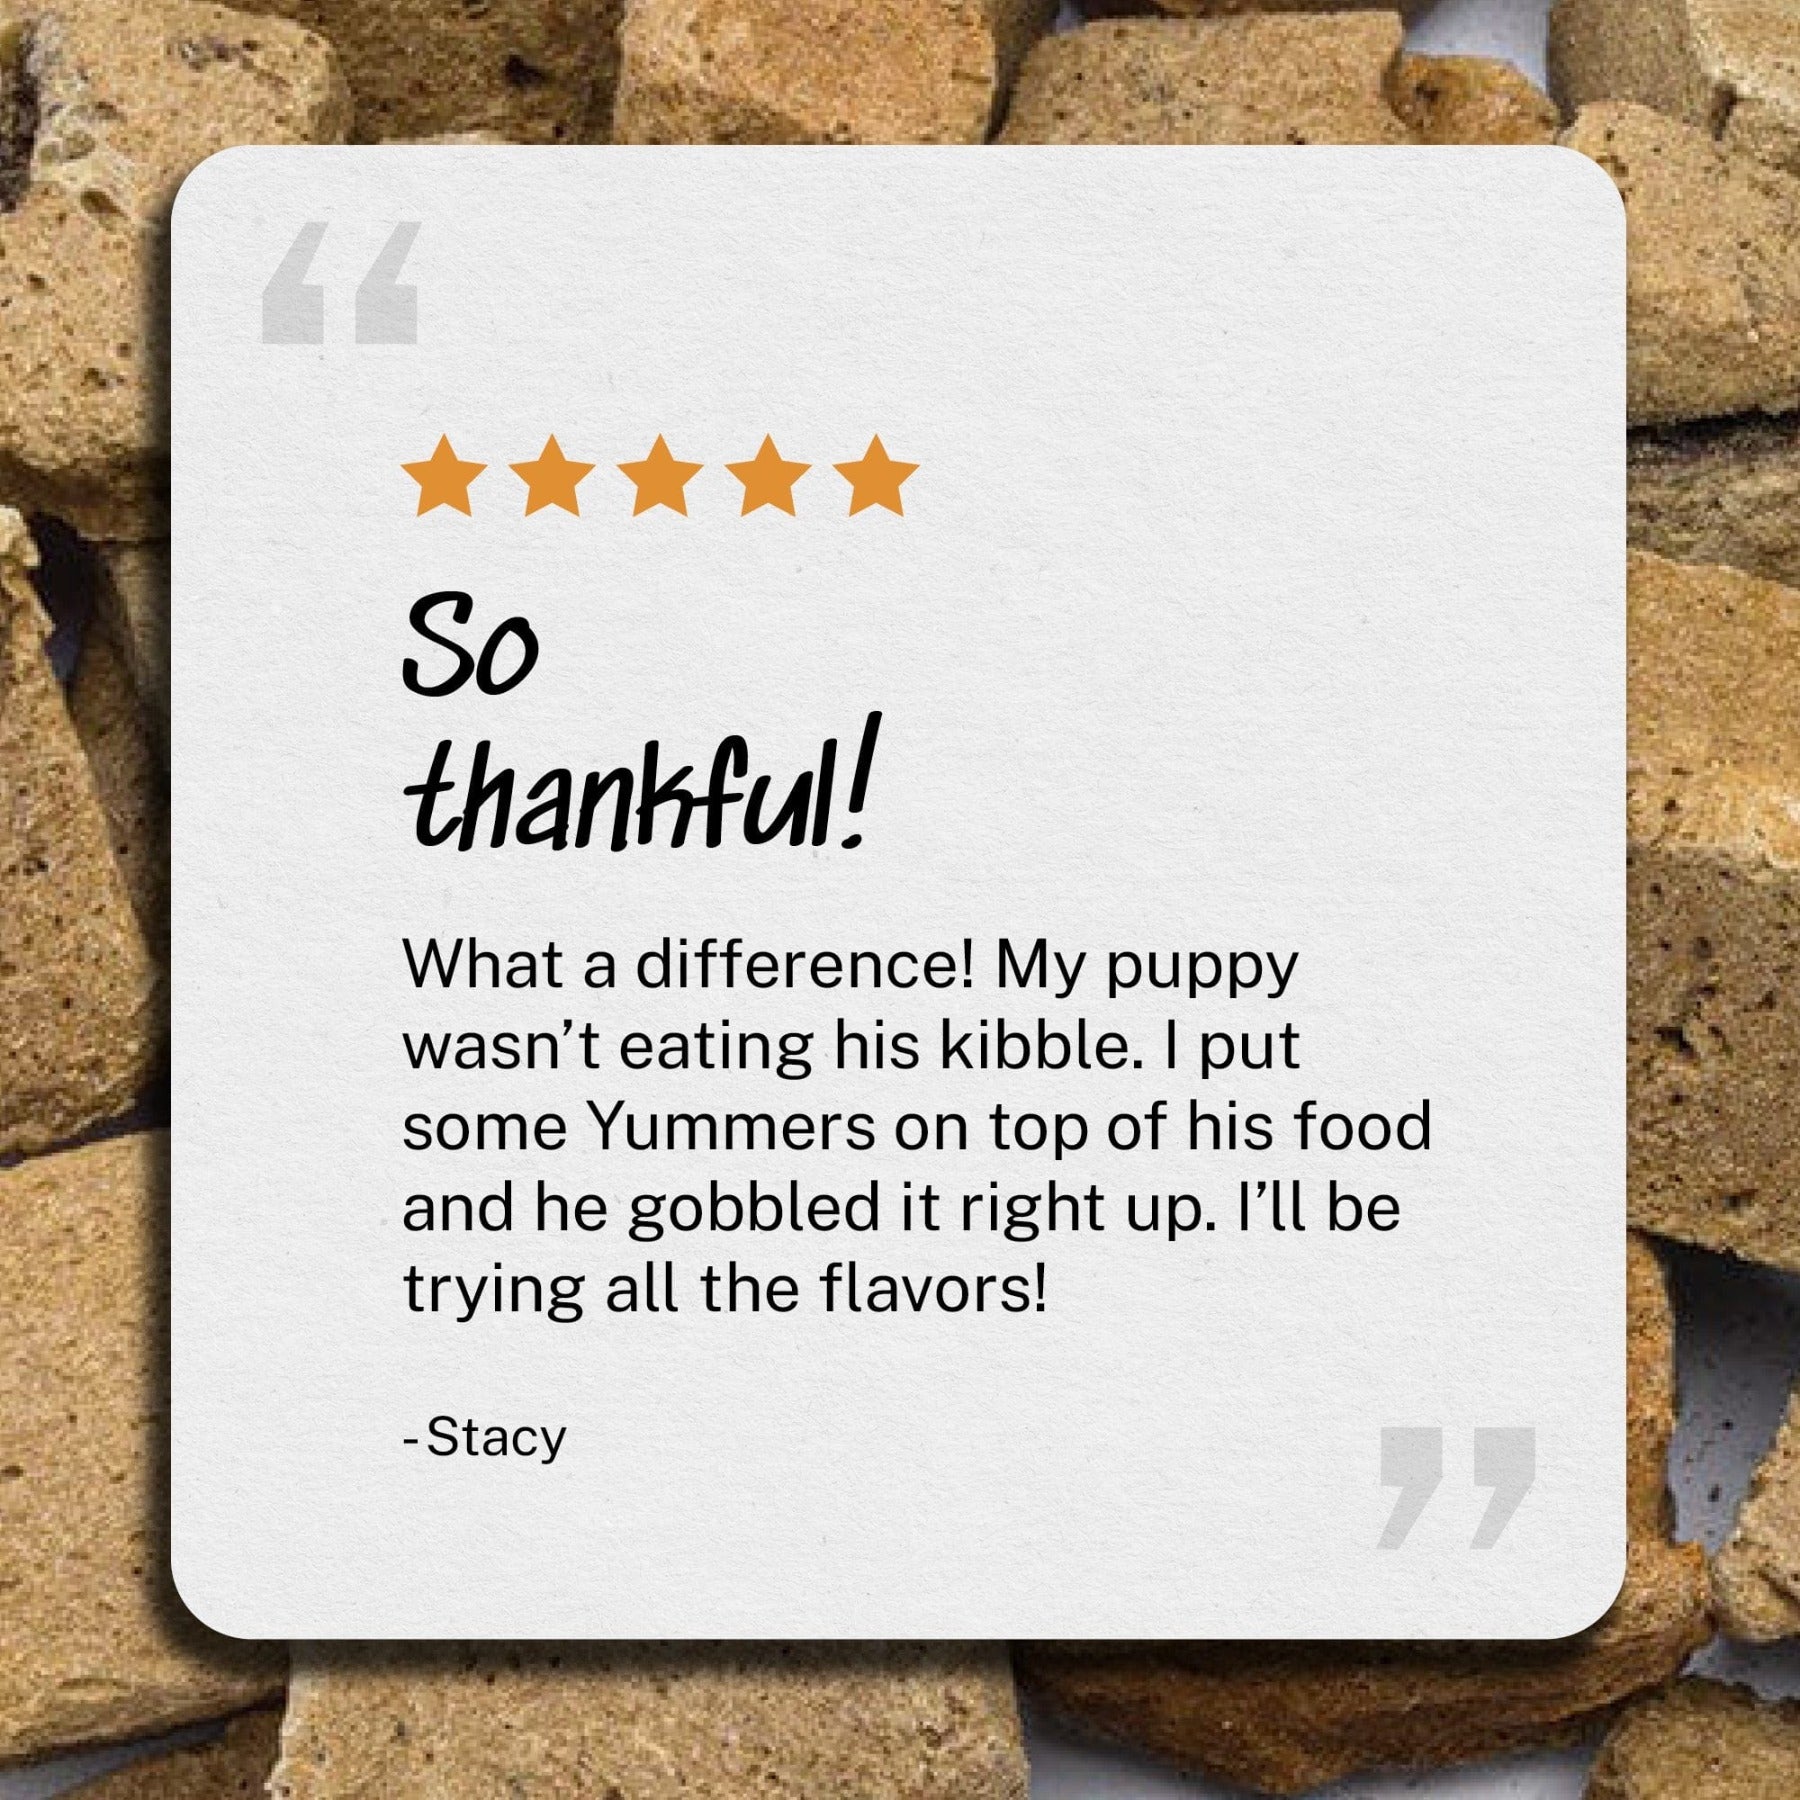 So thankful - What a difference! My puppy wasn’t eating his kibble. I put some Yummers on top of his food and he gobbled it right up. I’ll be trying all the flavors! - Stacy